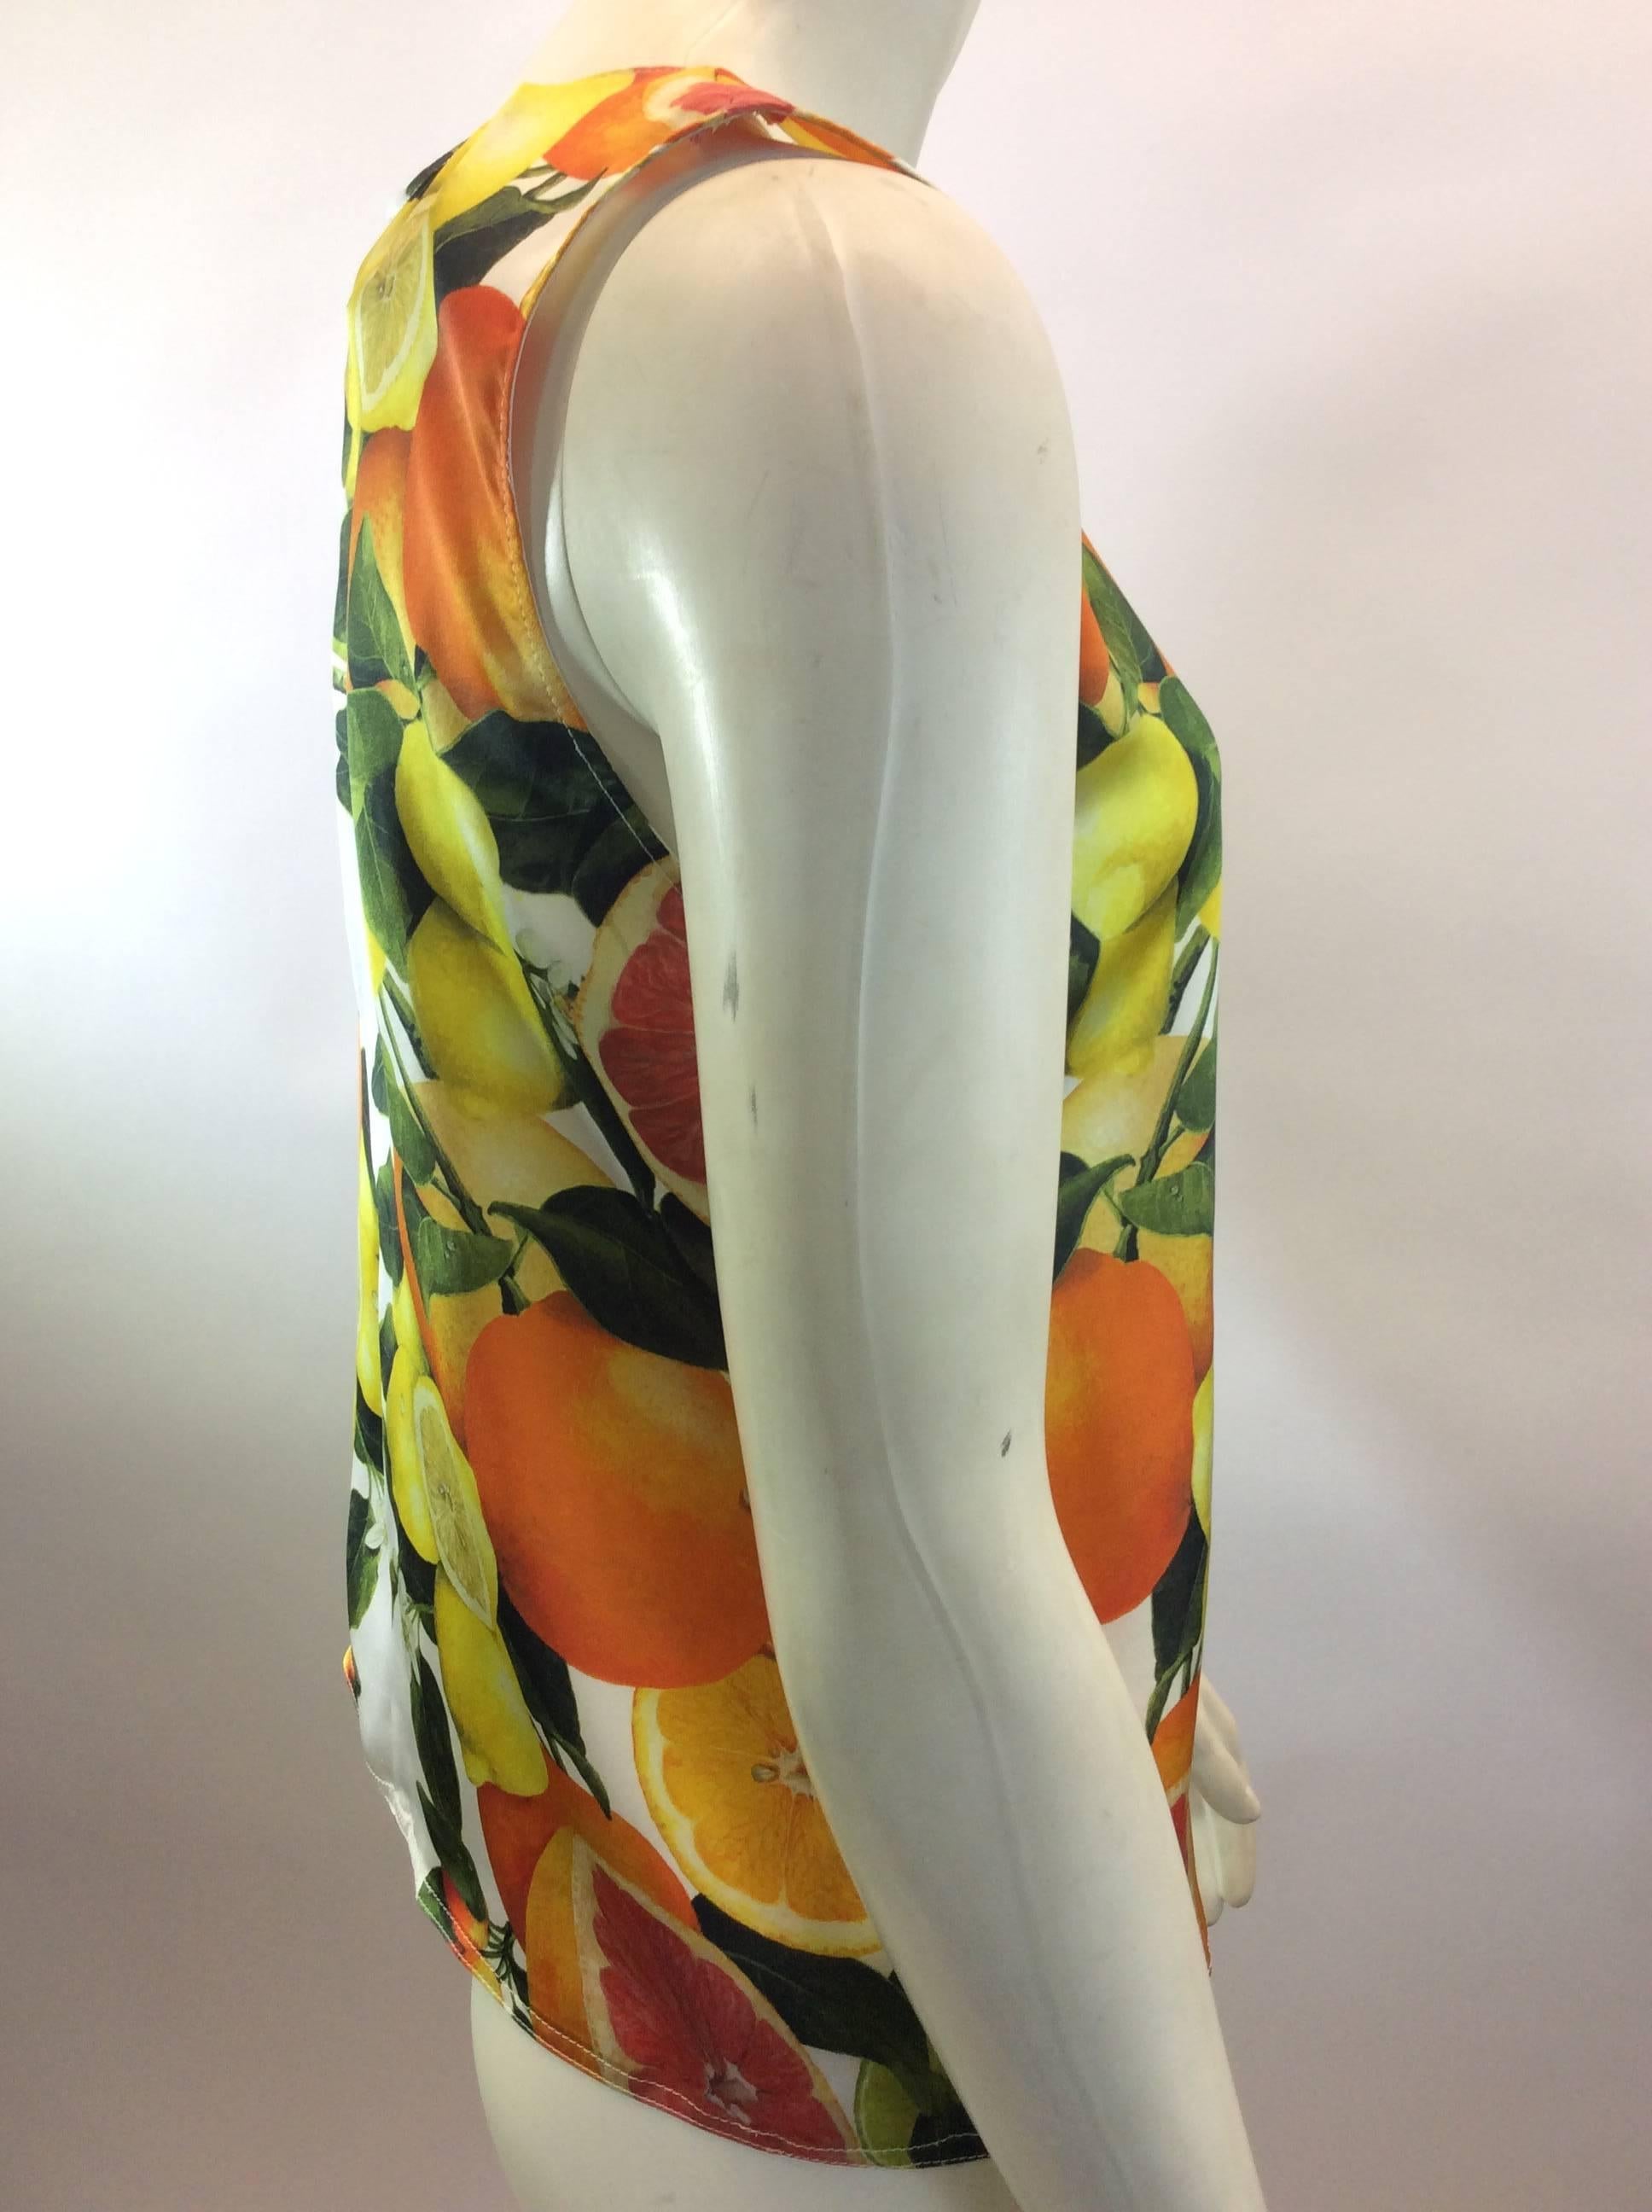 Stella McCartney Fruit Print Silk Blouse In Excellent Condition For Sale In Narberth, PA